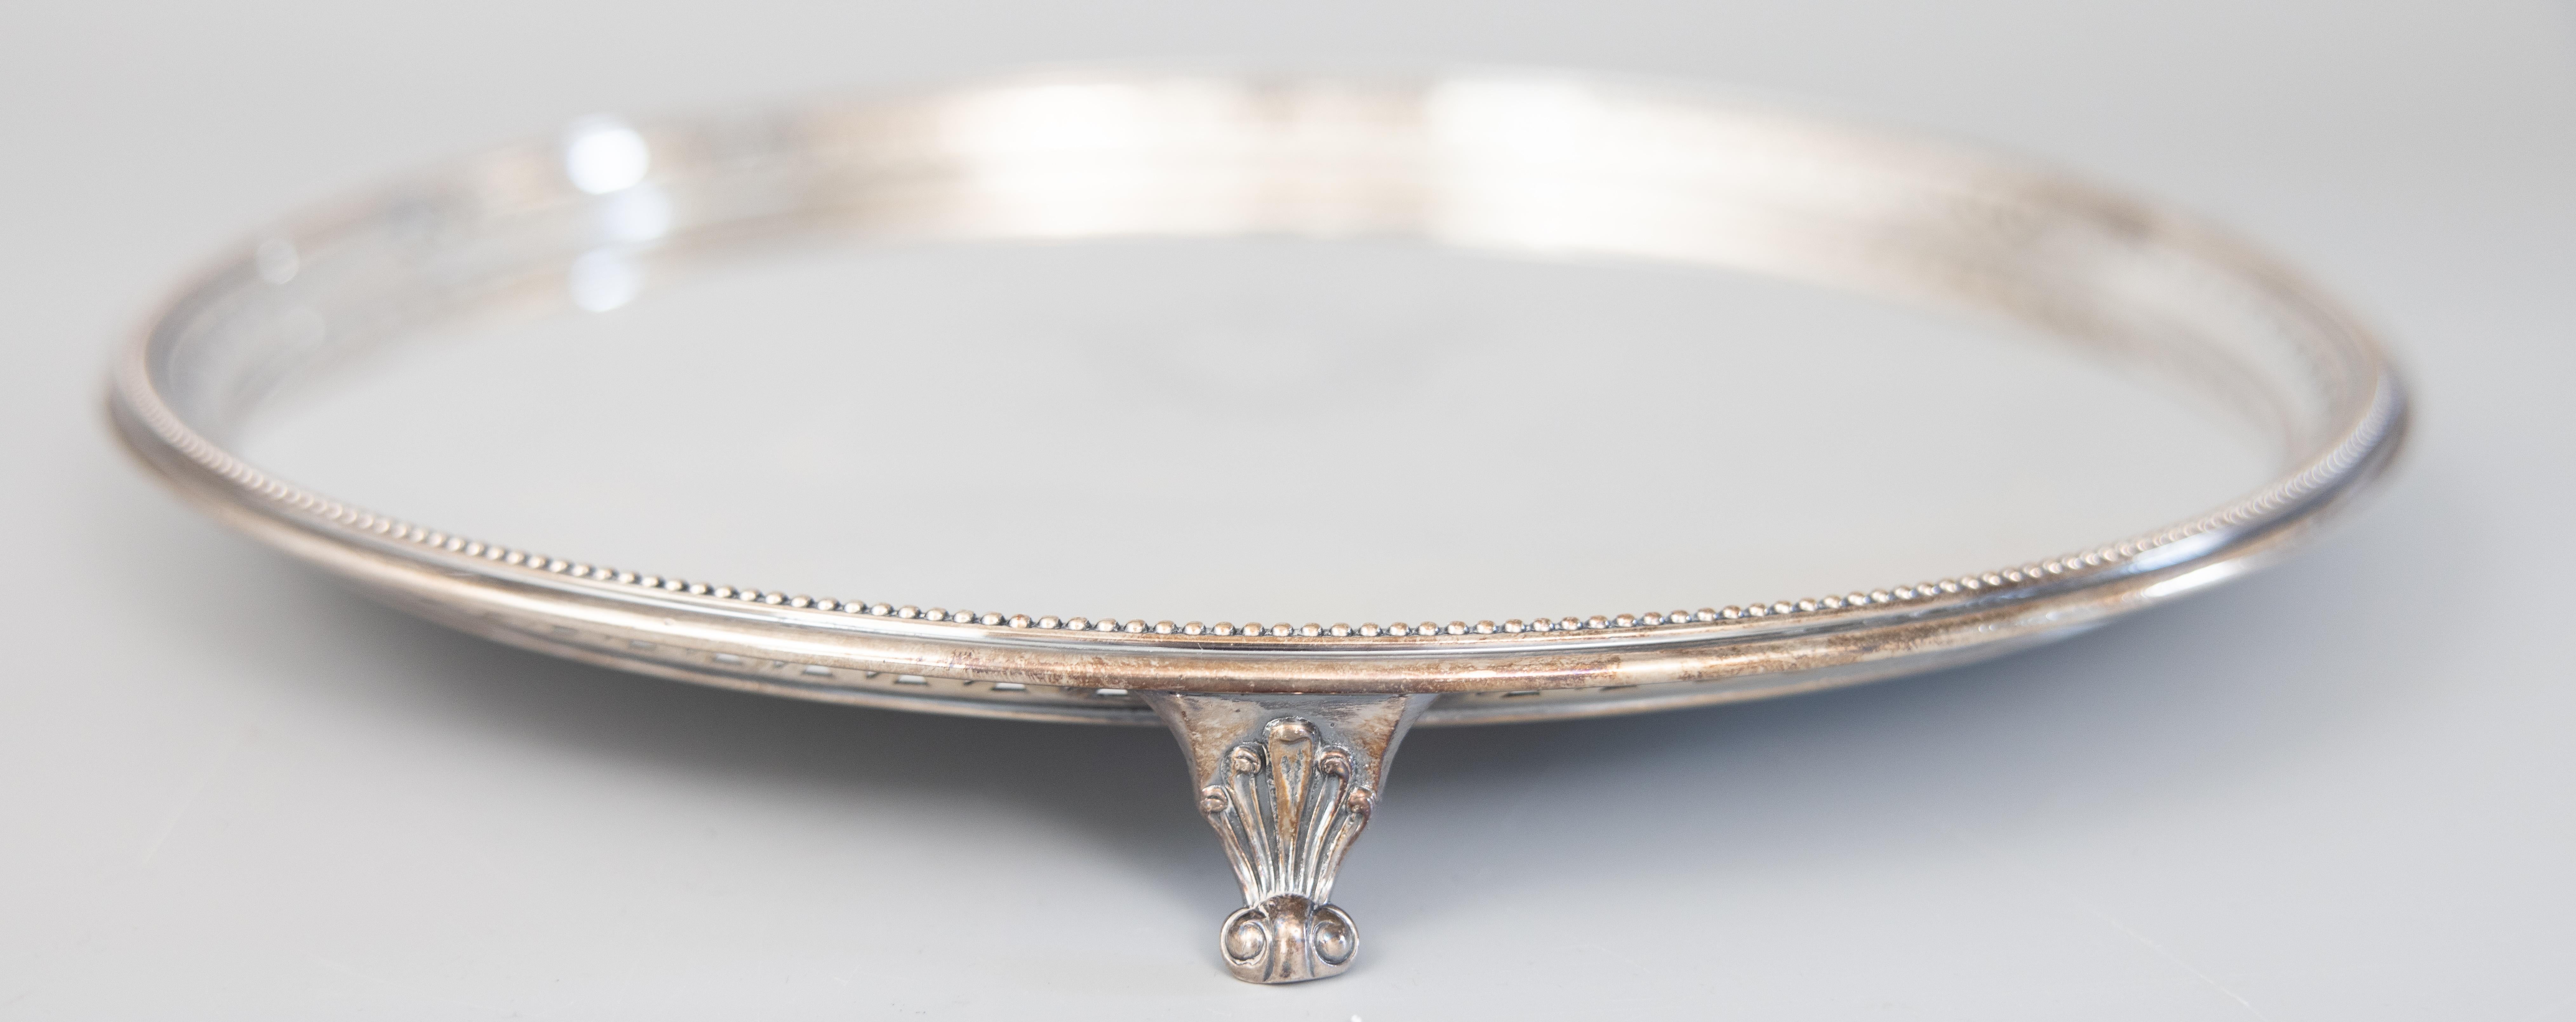 Early 20th Century English Edwardian Silver Plate Round Footed Salver Tray, circa 1900